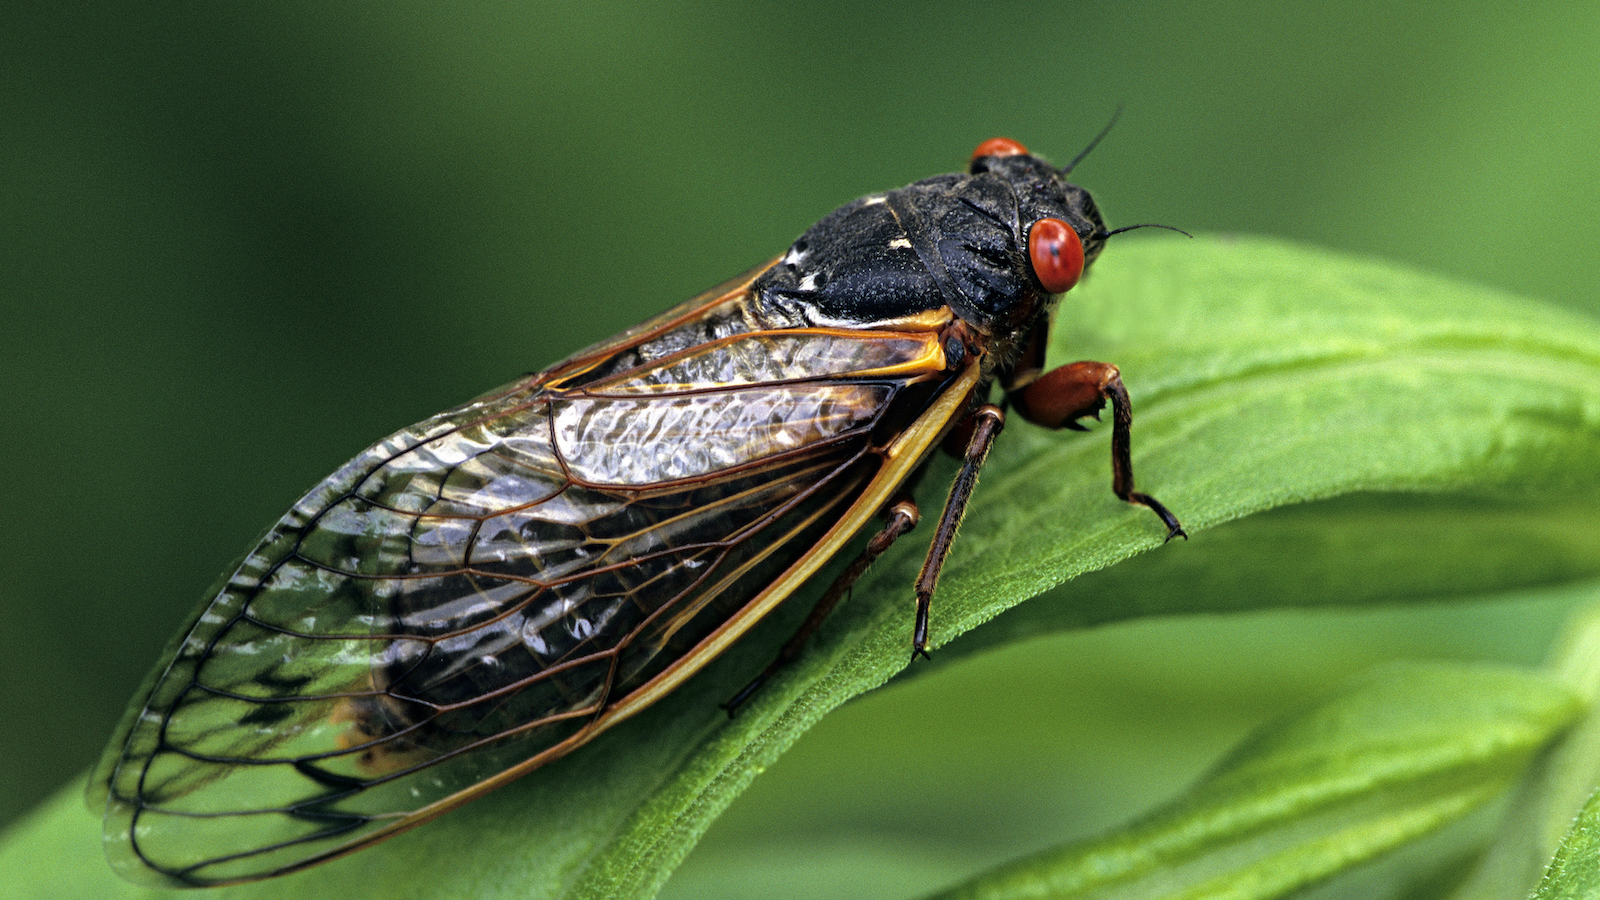 A trillion cicadas will emerge in the next few weeks. This hasn’t happened since 1803.